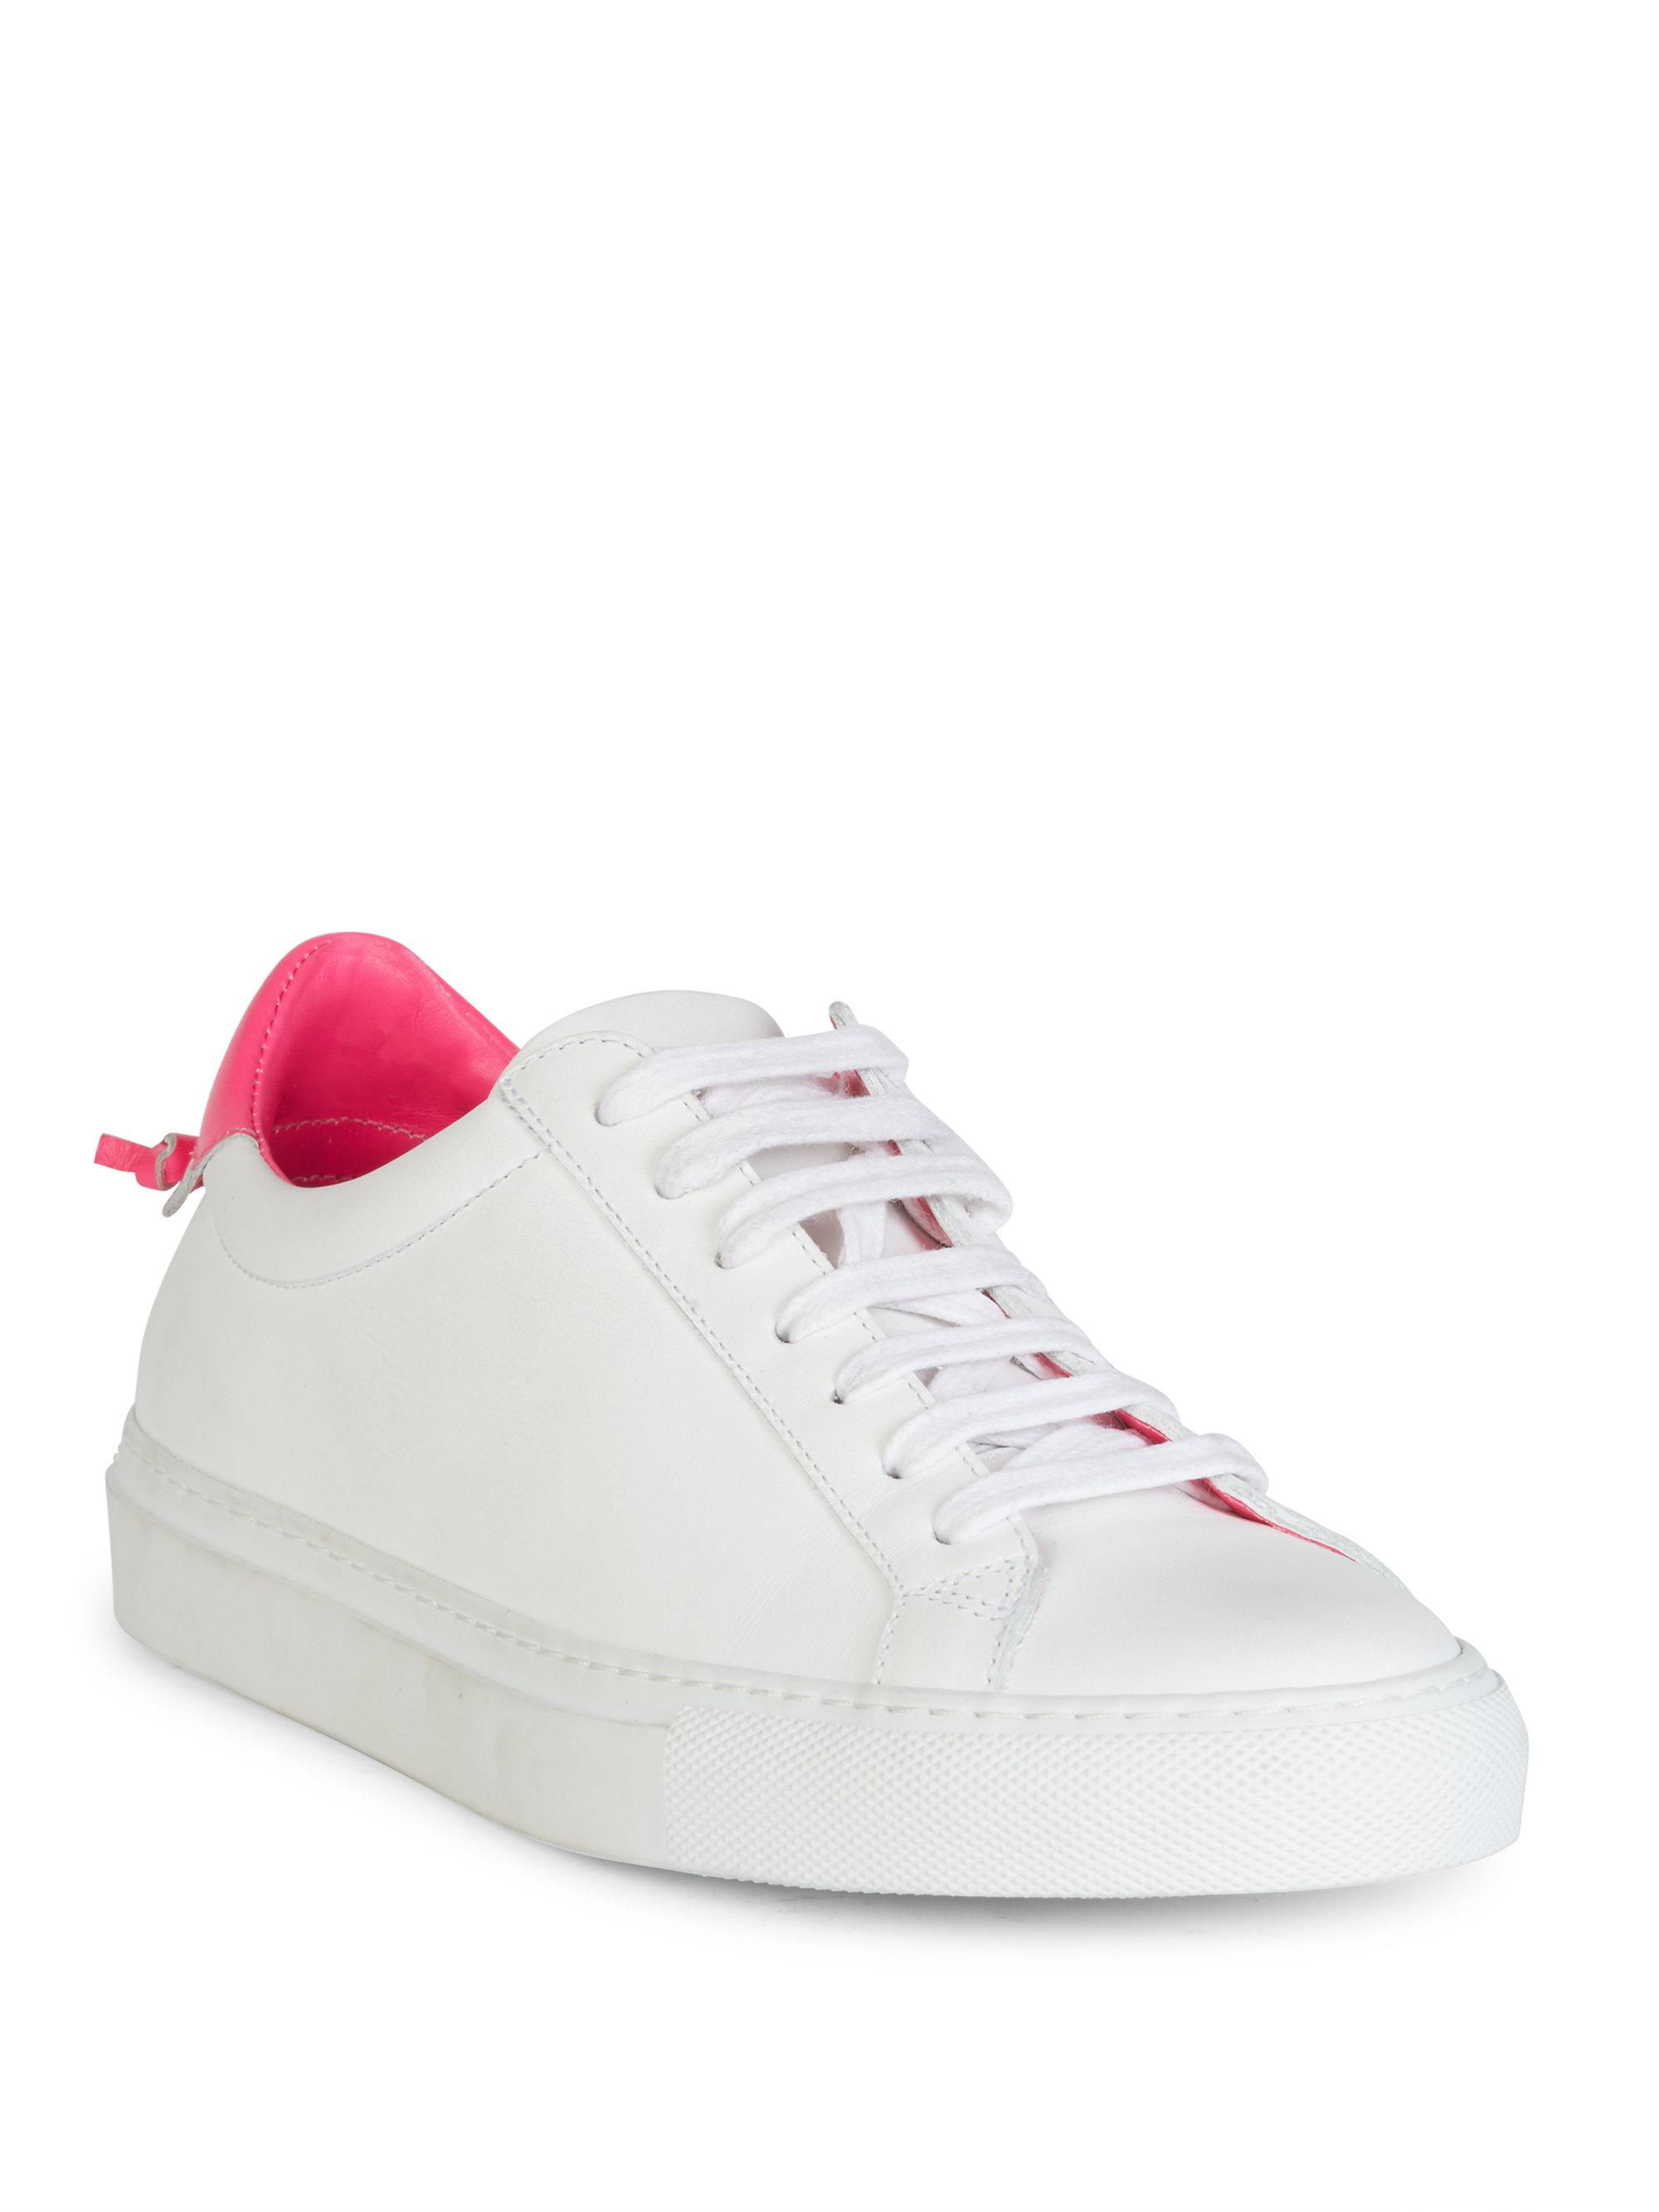 Givenchy Urban Knots Leather Sneakers 